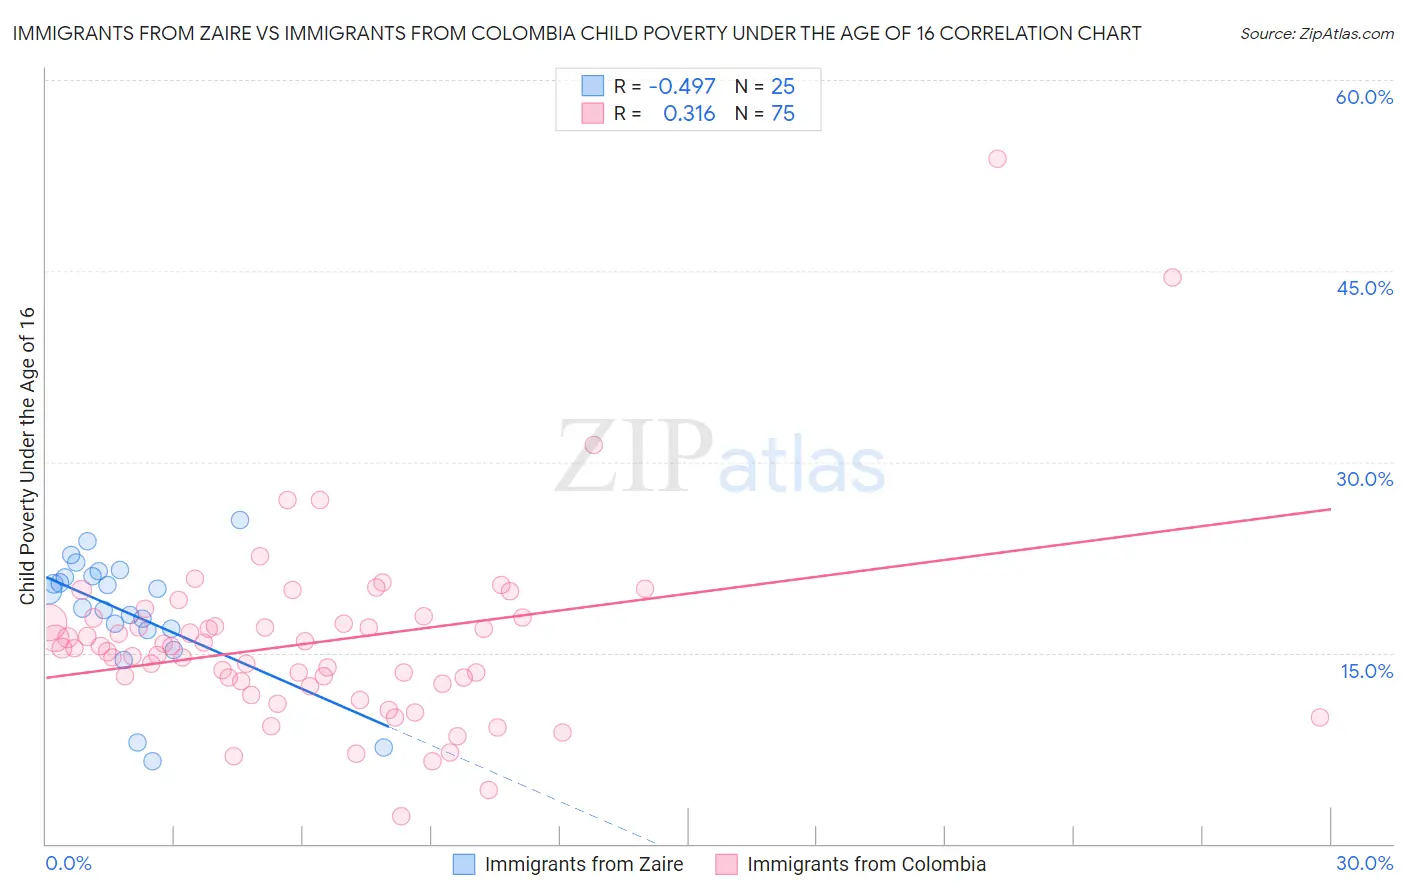 Immigrants from Zaire vs Immigrants from Colombia Child Poverty Under the Age of 16